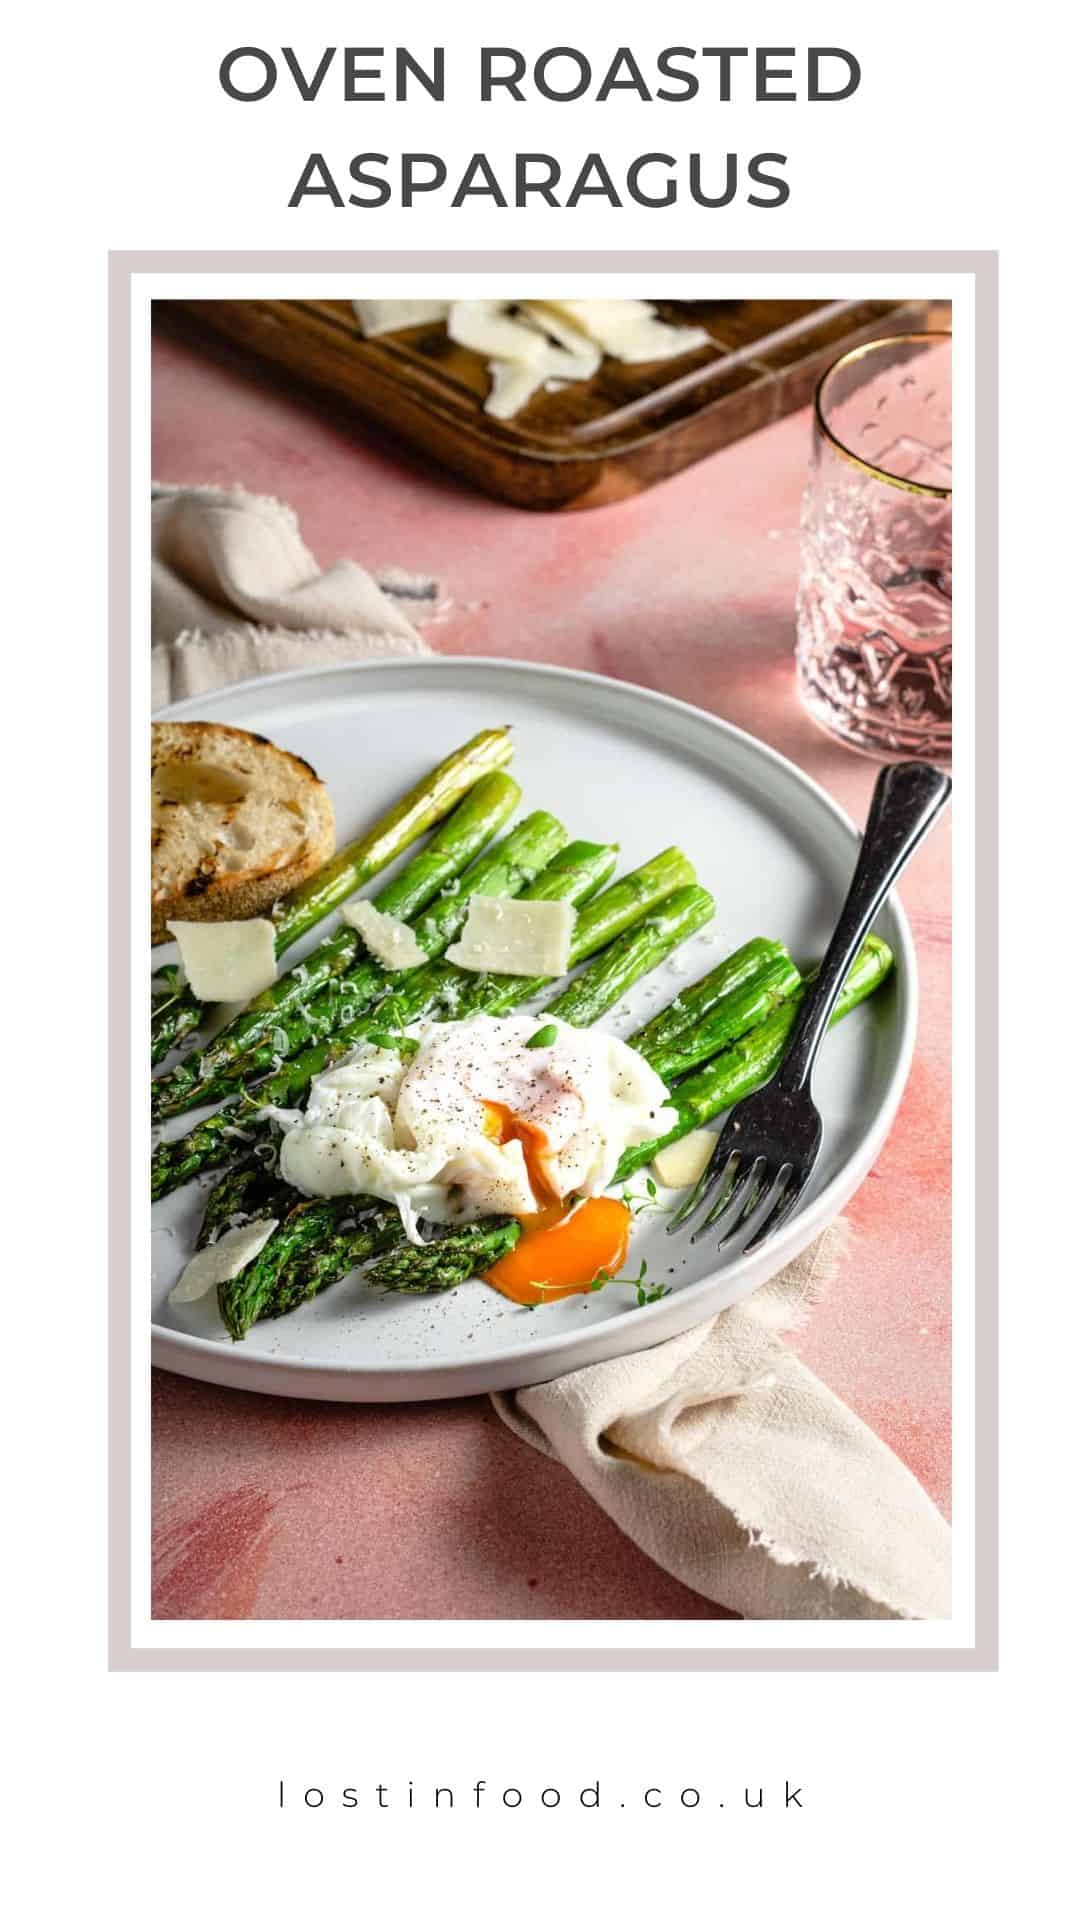 Pinterst graphic of roasted asparagus topped with cheese and a poached egg.